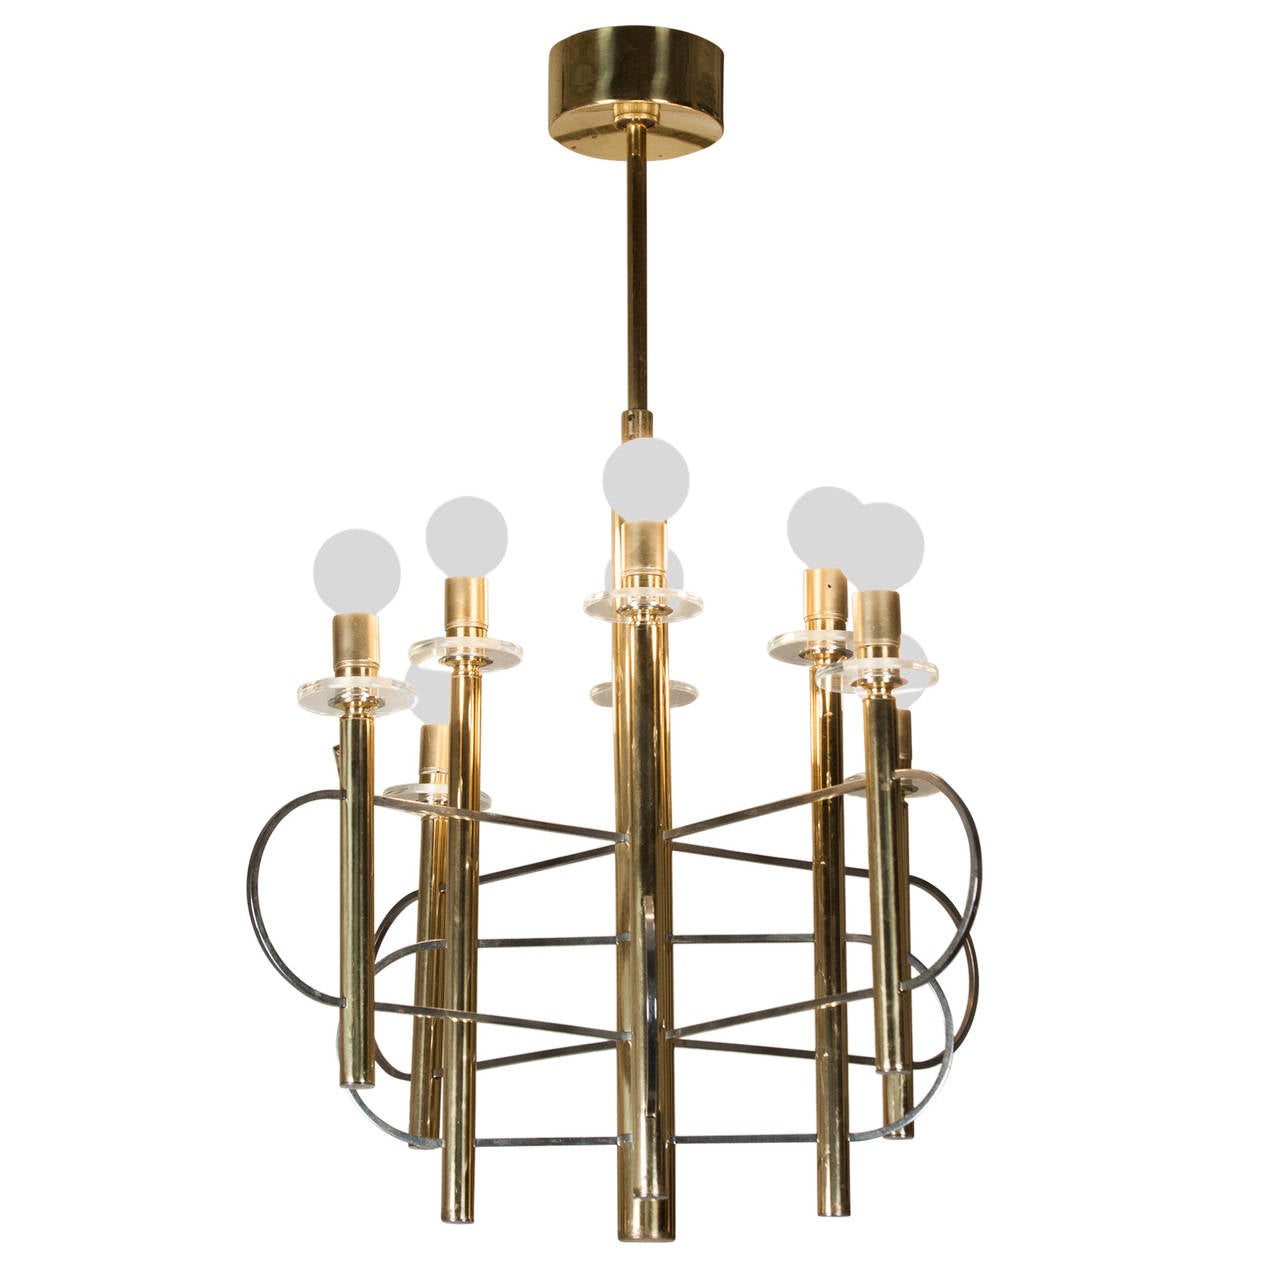 Chrome, brass and Lucite eight-light chandelier, eight brass posts connected by looping chrome elements, with Lucite bobeches, by Gaetano Sciolari, Italian, 1960s. Diameter of fixture 23 in, overall height 29 1/2 in. (Item #2313).